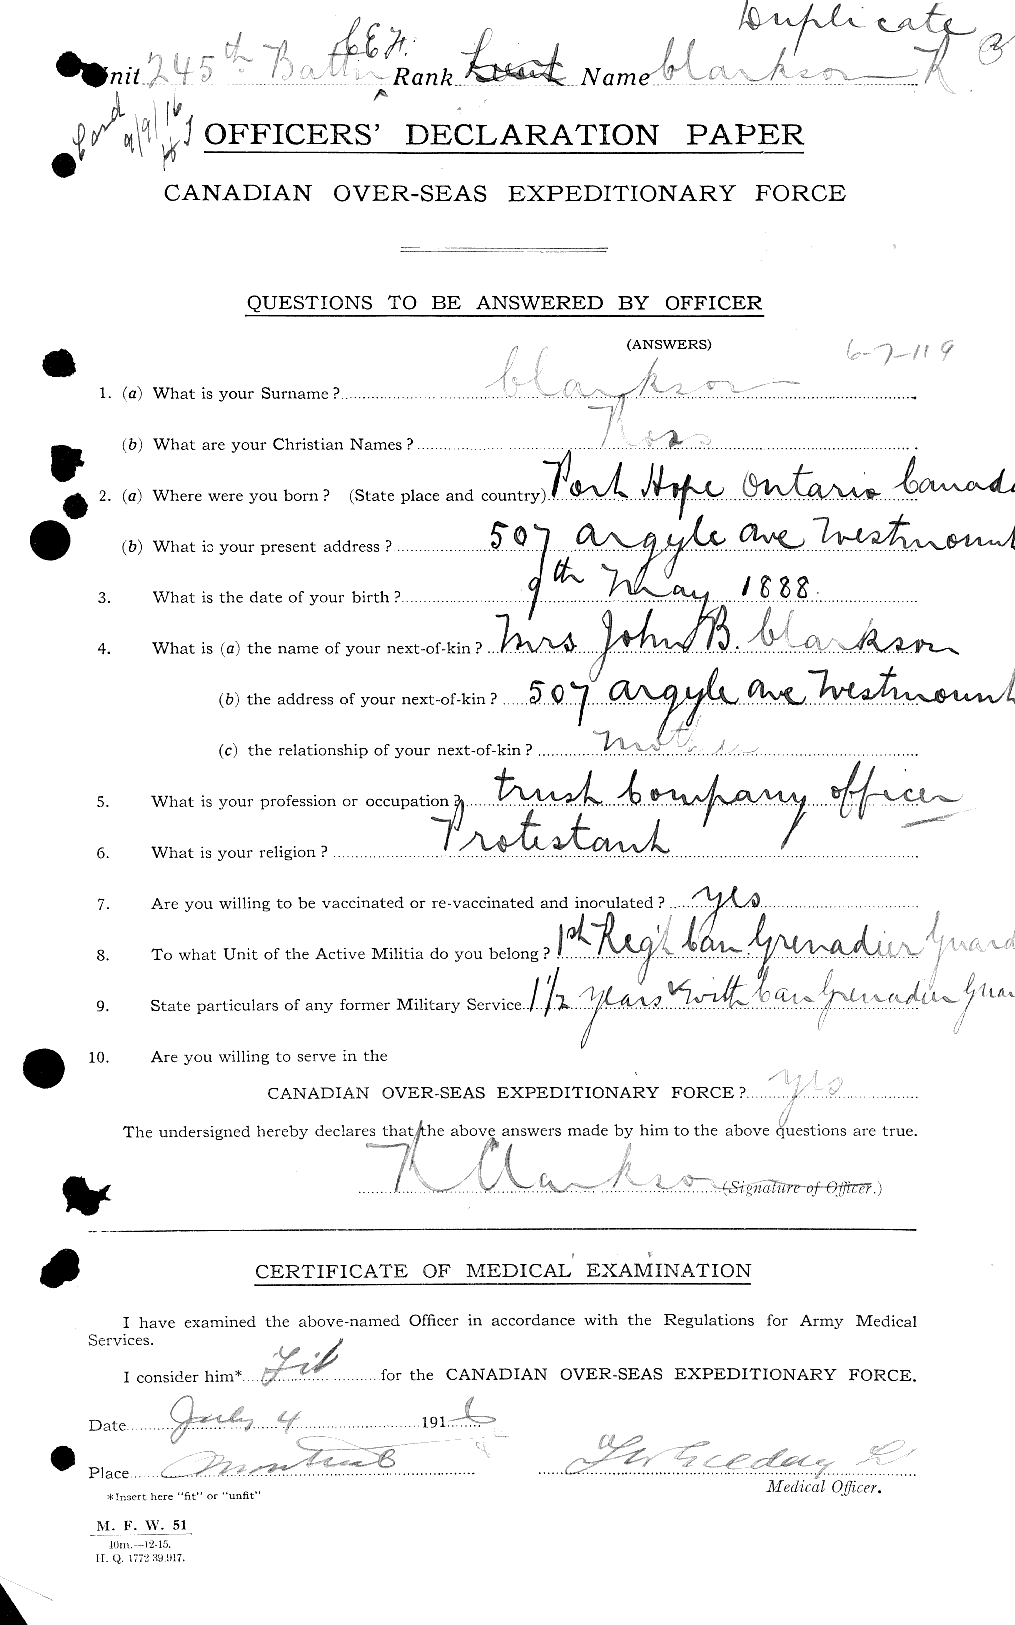 Personnel Records of the First World War - CEF 019006a